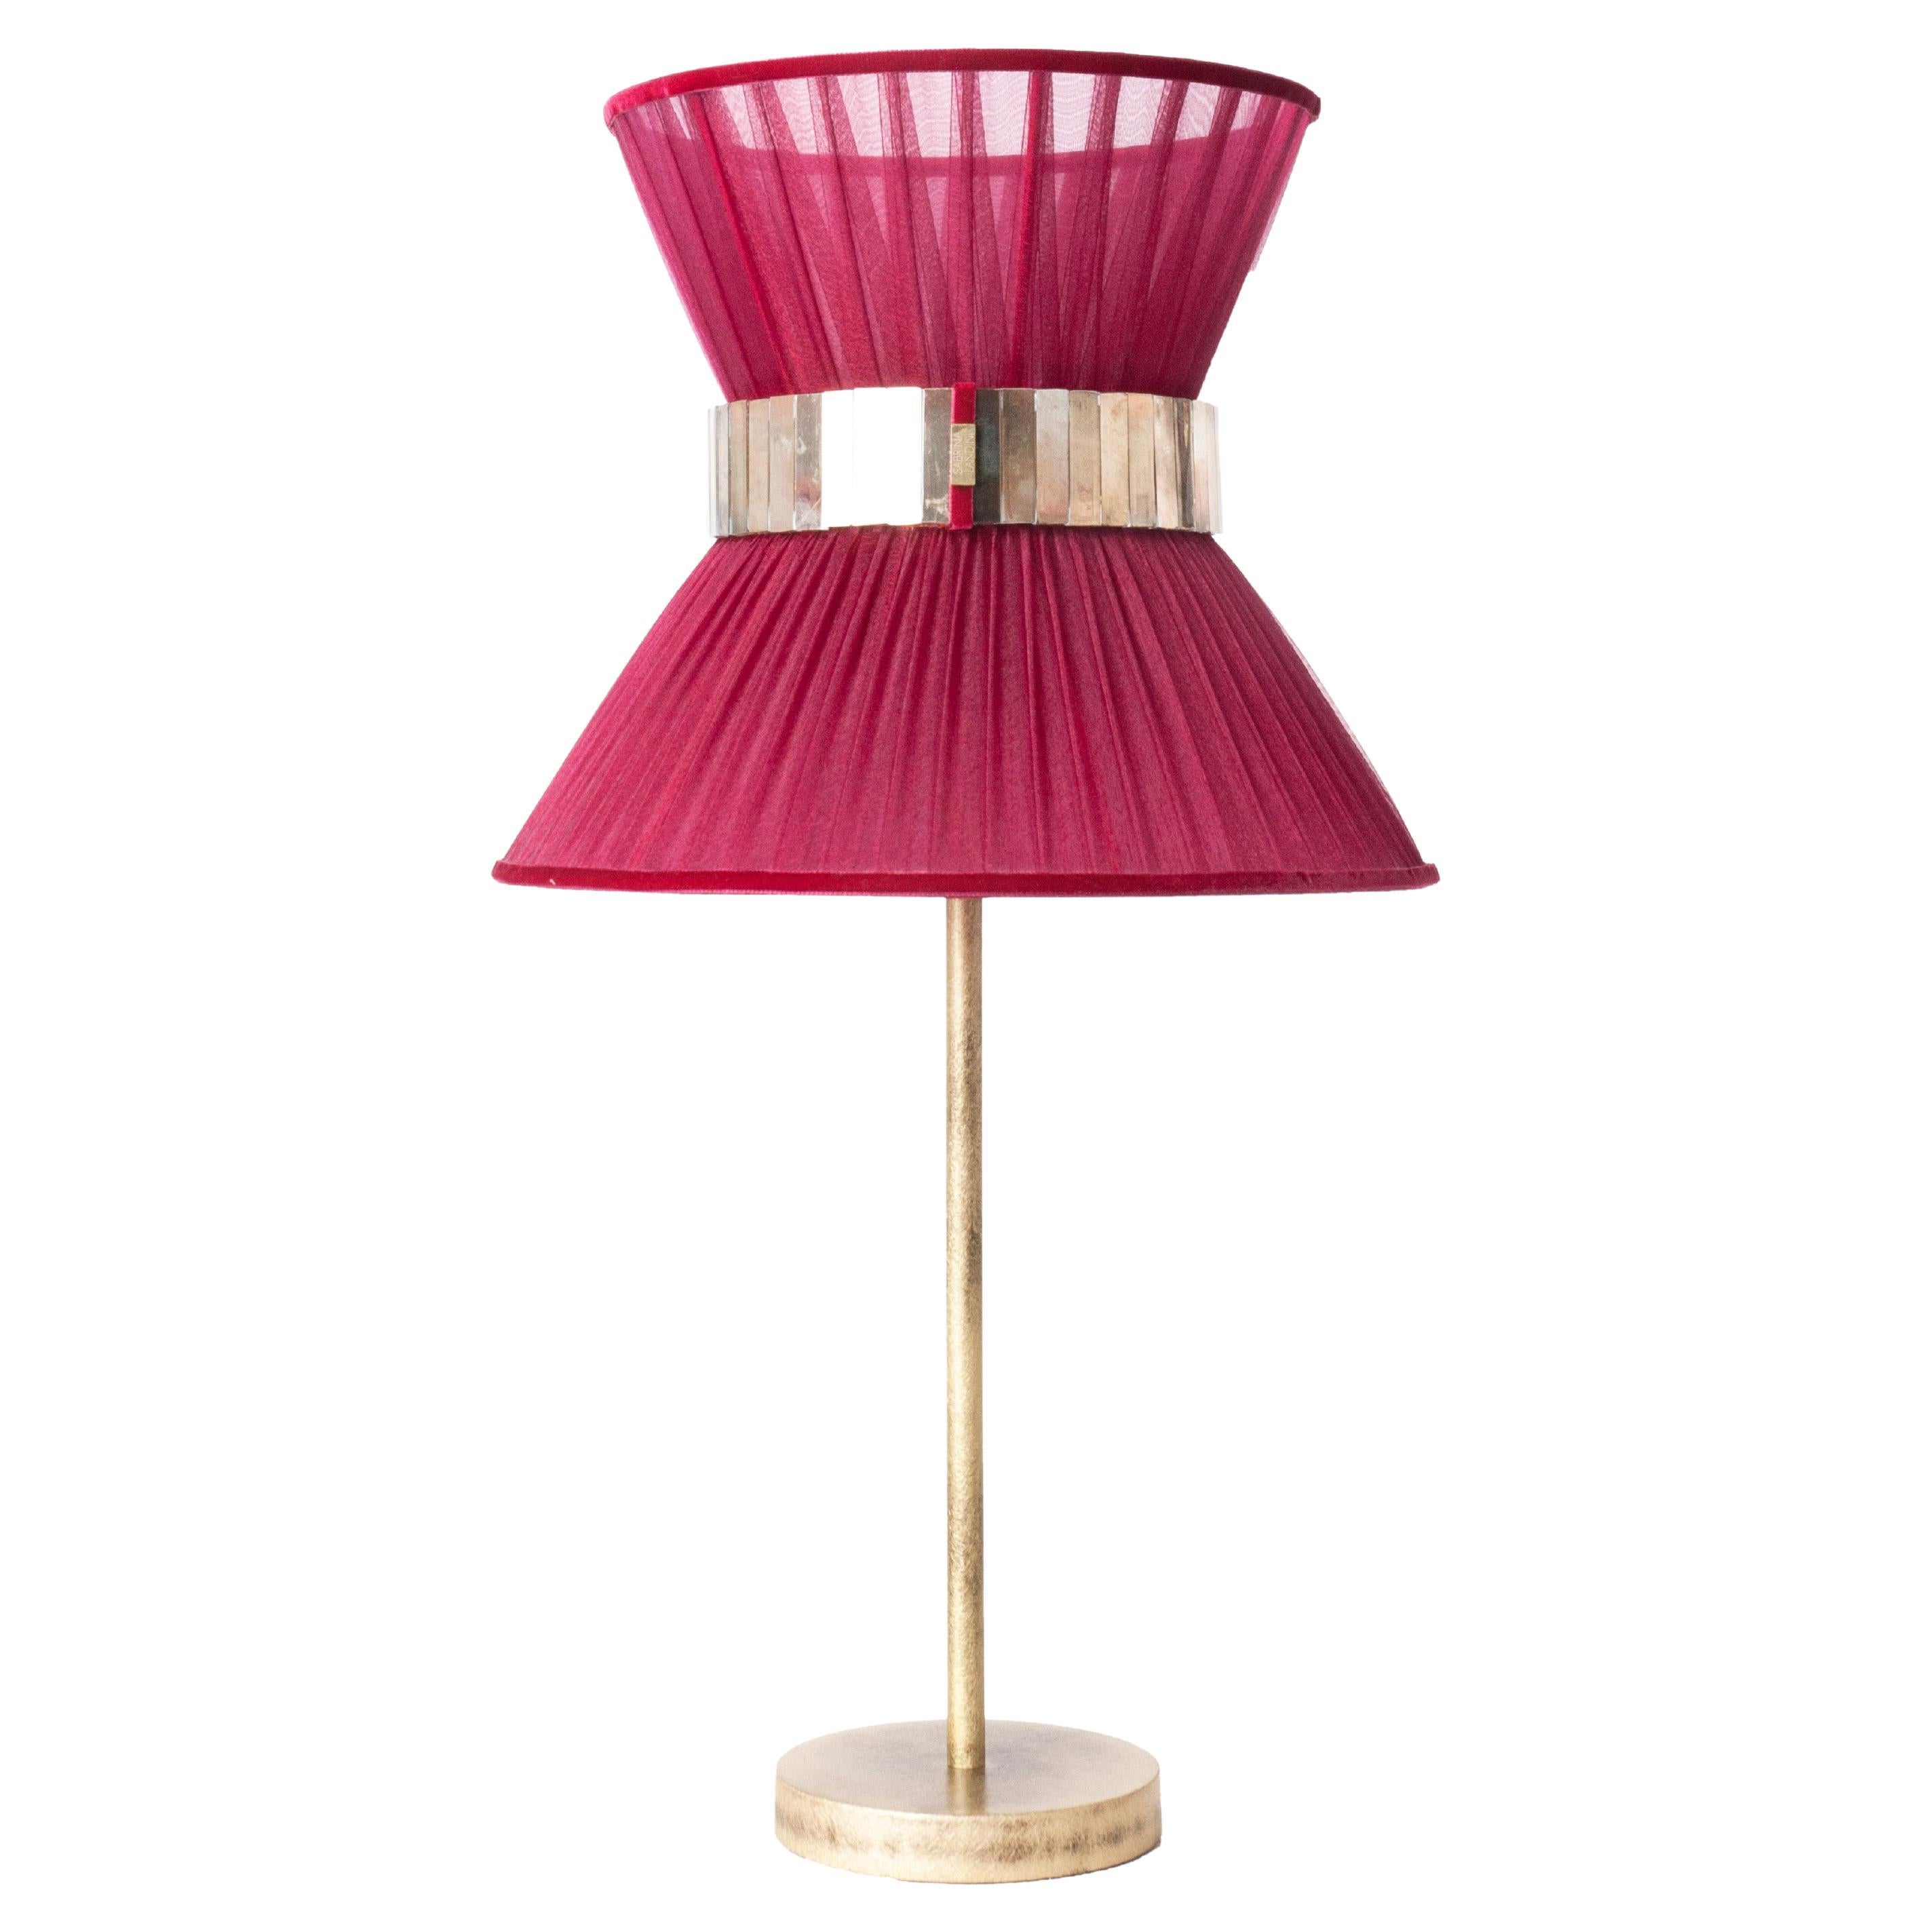  “Tiffany” Table Lamp 30 Ruby Silk, Antiqued Brass, Silvered Glass   For Sale